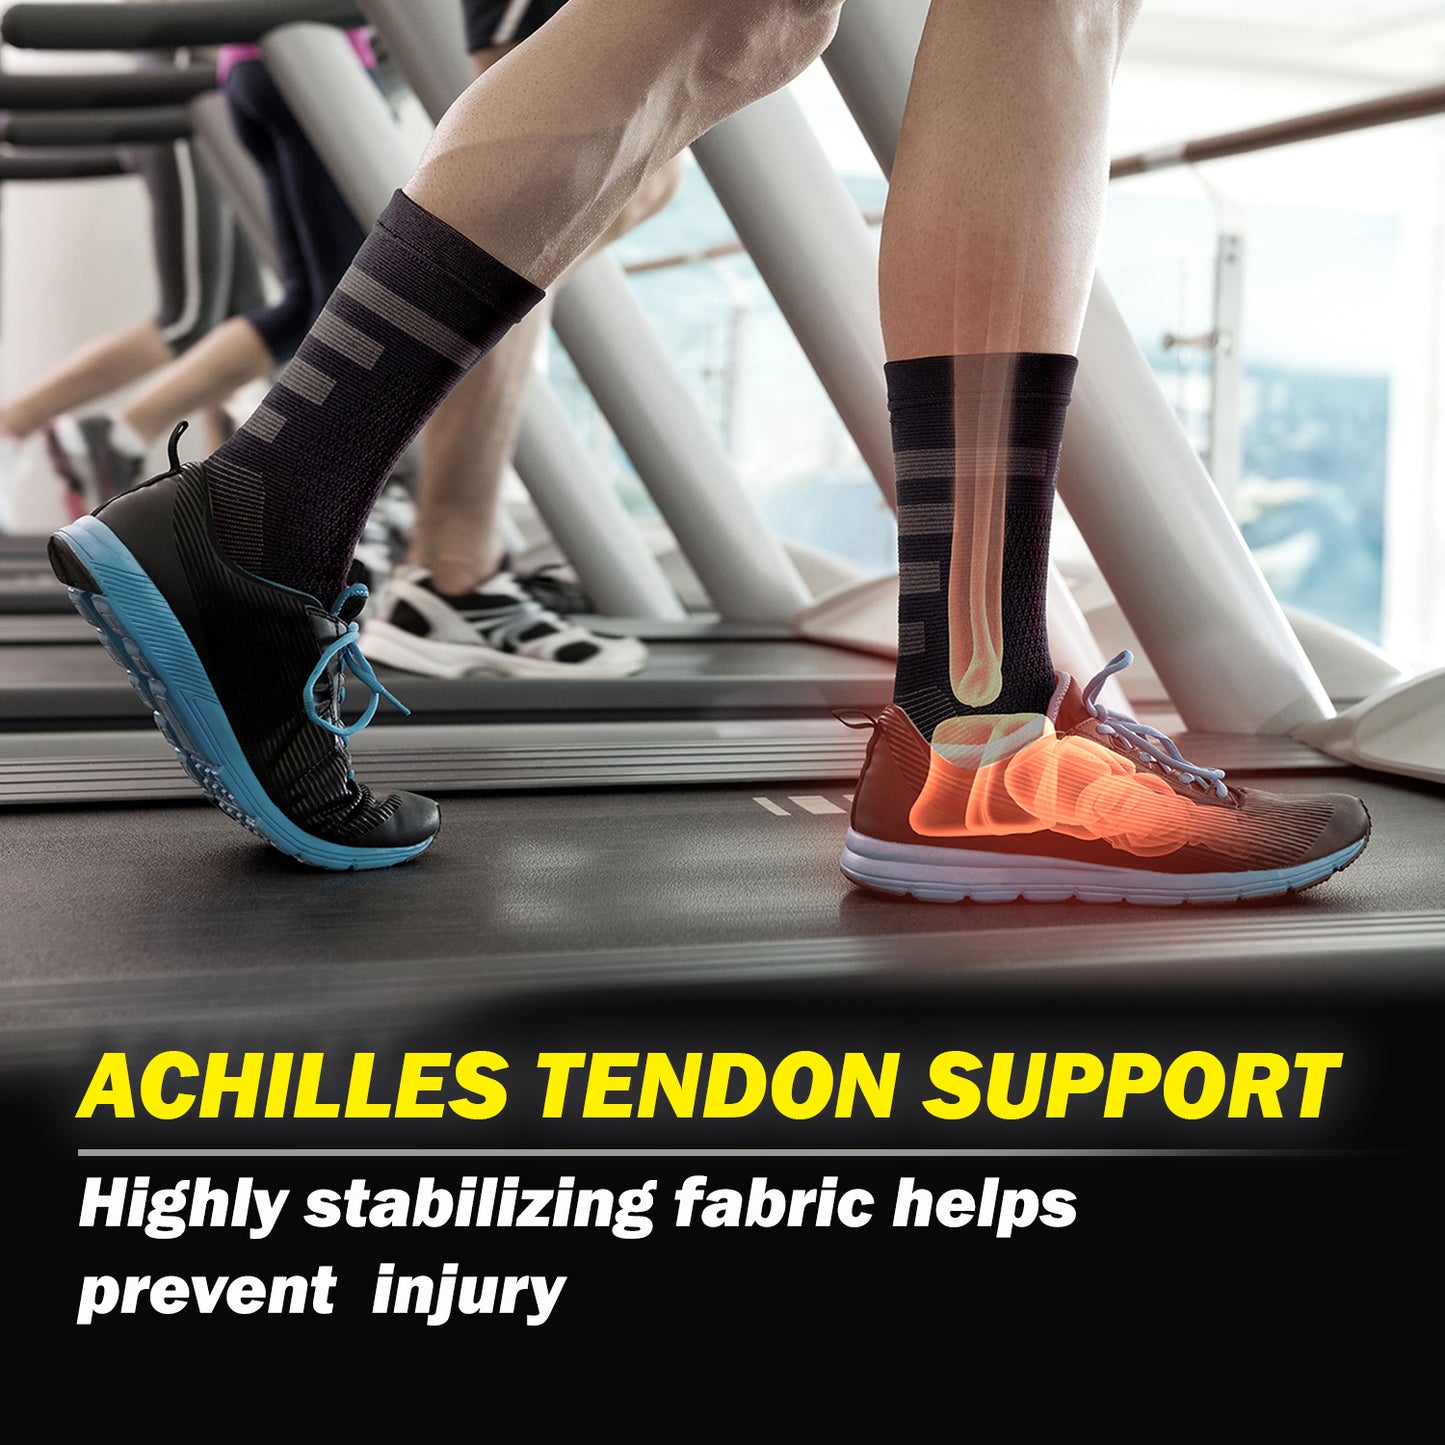 a close up of a person's feet on a treadmill with text: 'ACHILLES TENDON SUPPORT Highly stabilizing fabric helps prevent injury'